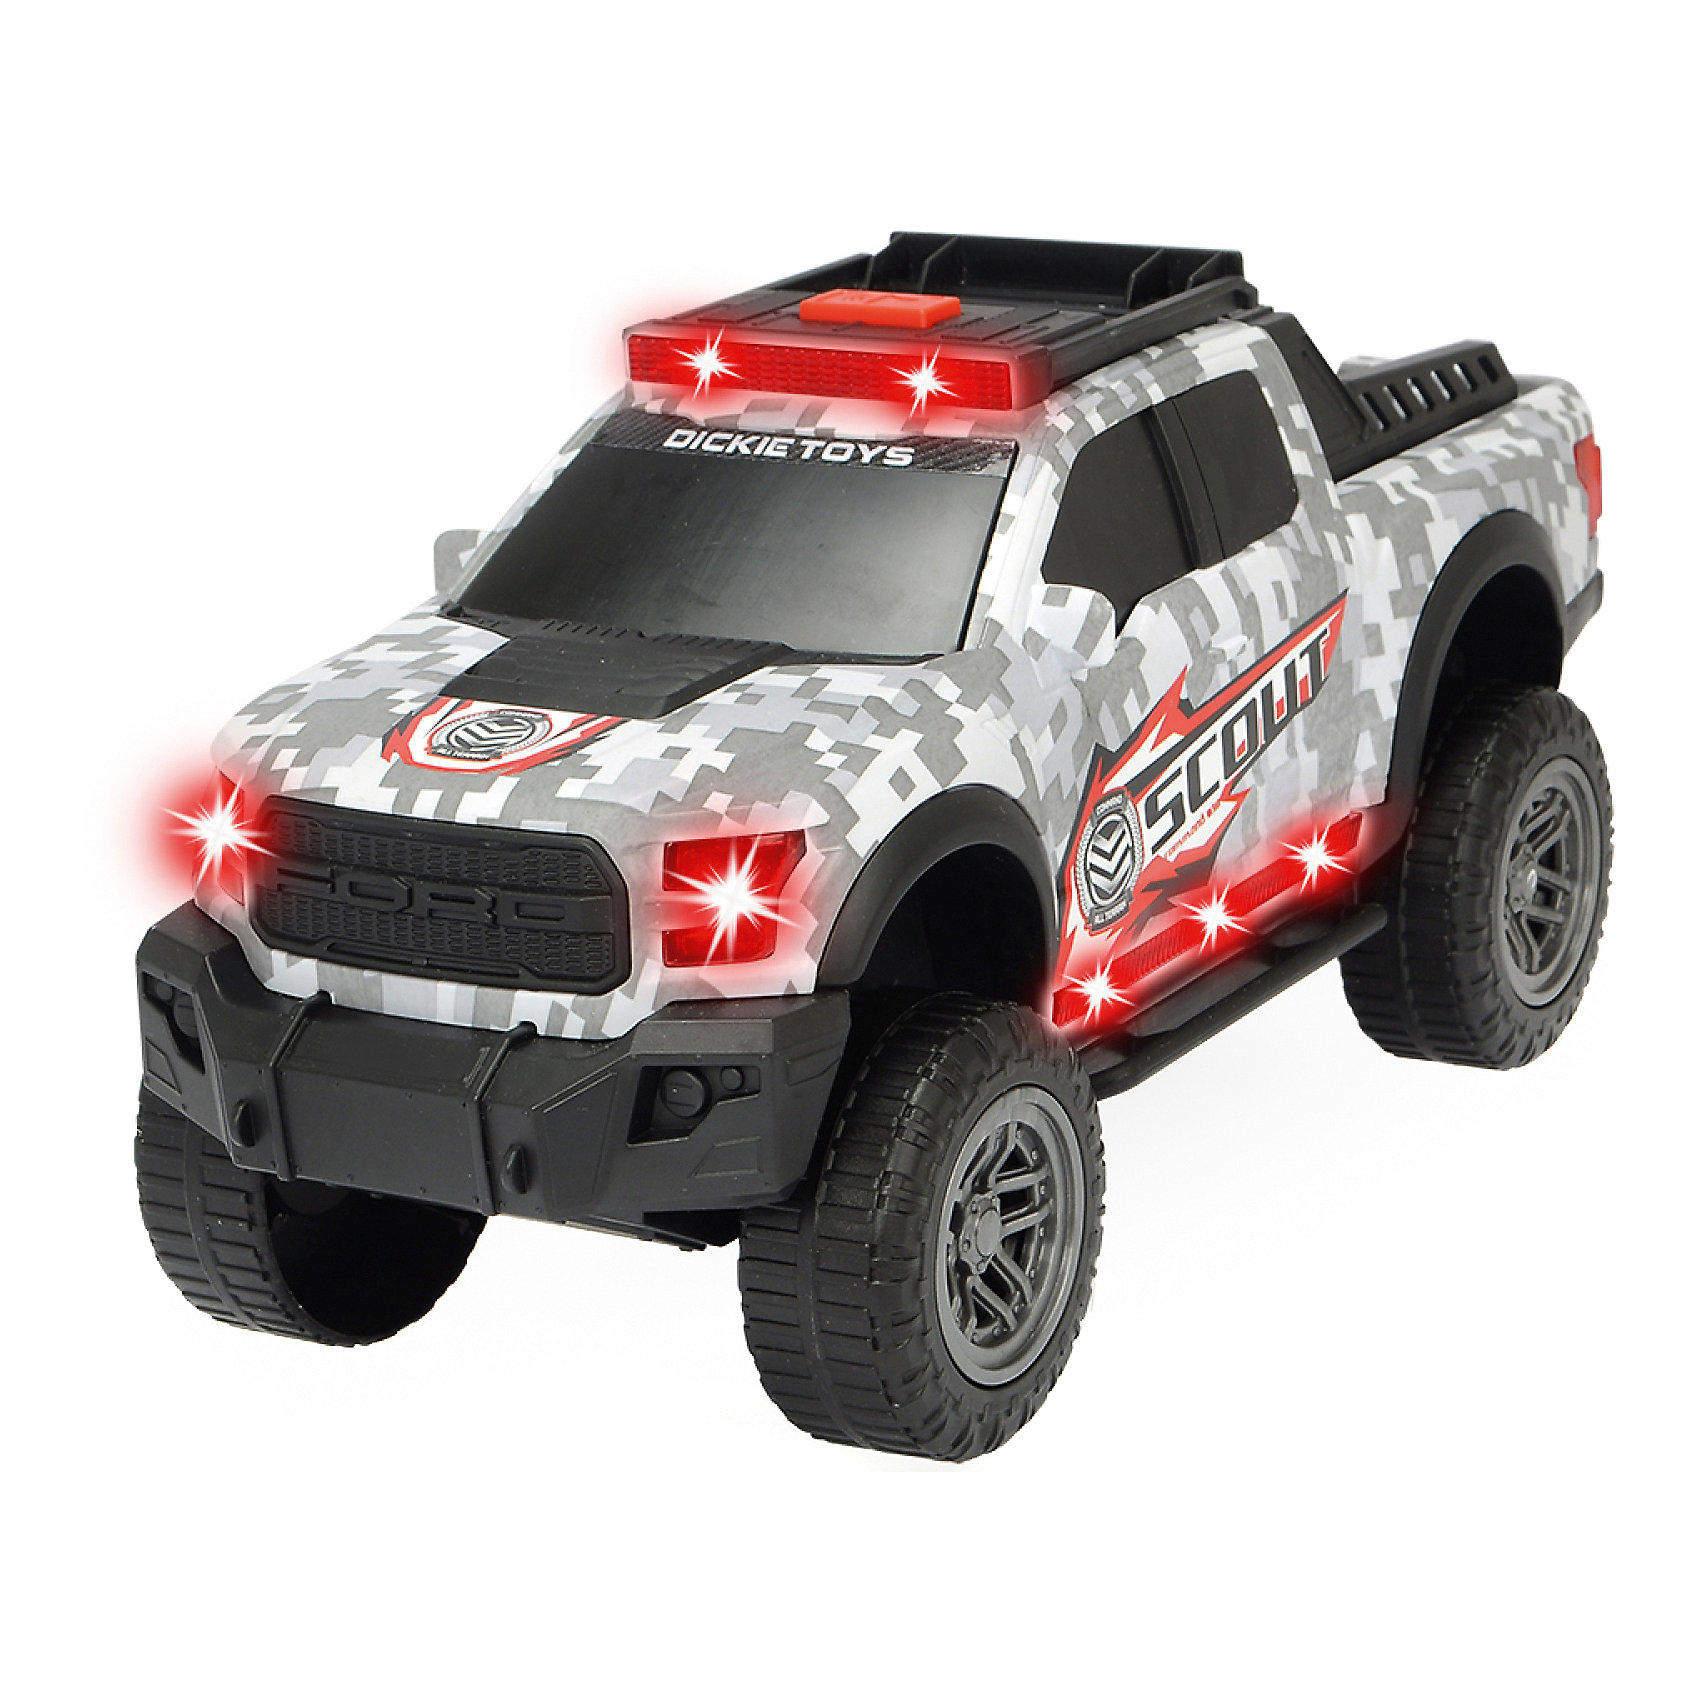 Машинка Scout Ford F150 Raptor, 33 см, свет и звук Dickie Toys 8524541